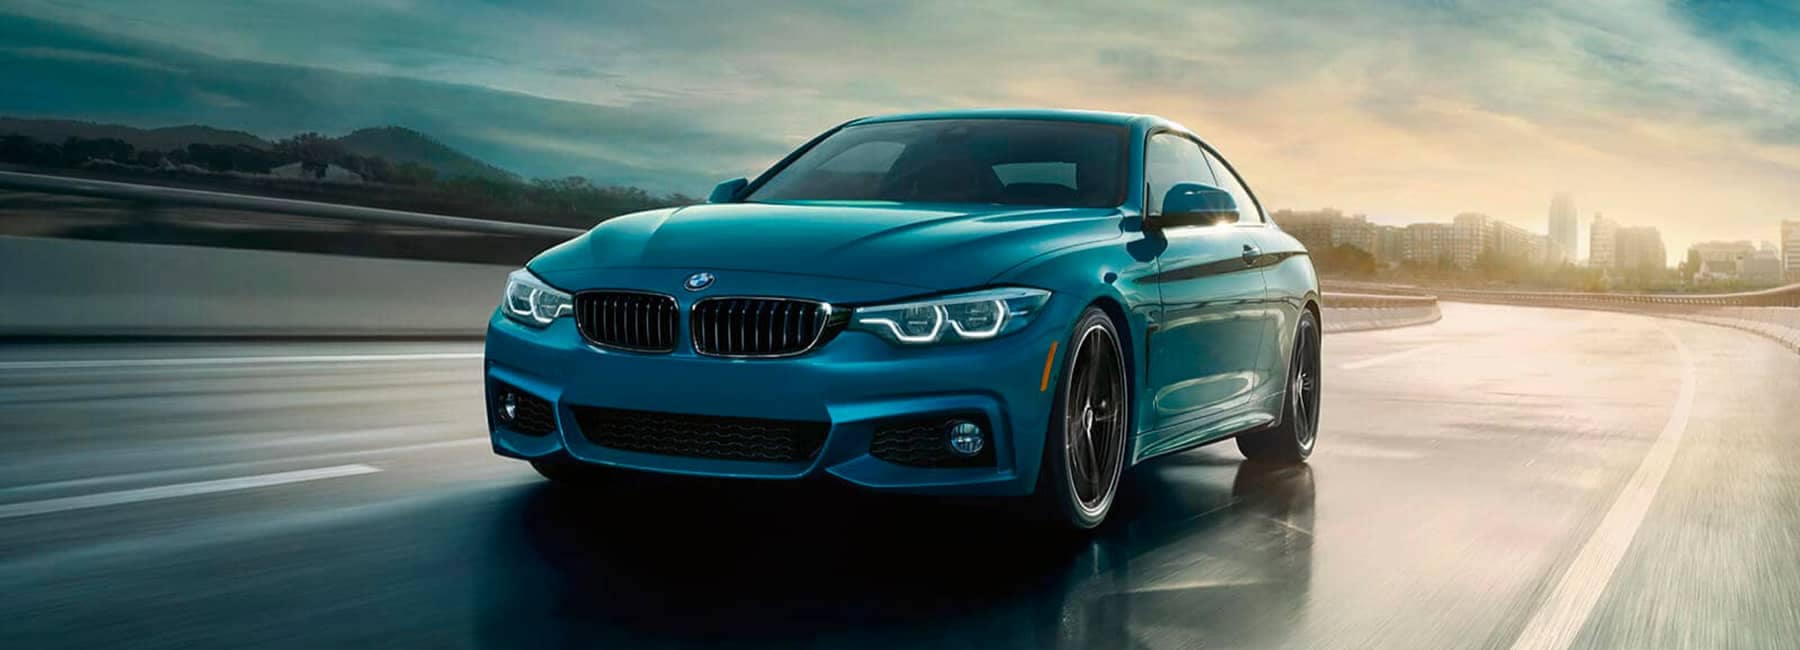 BMW 4 Series Driving on a road